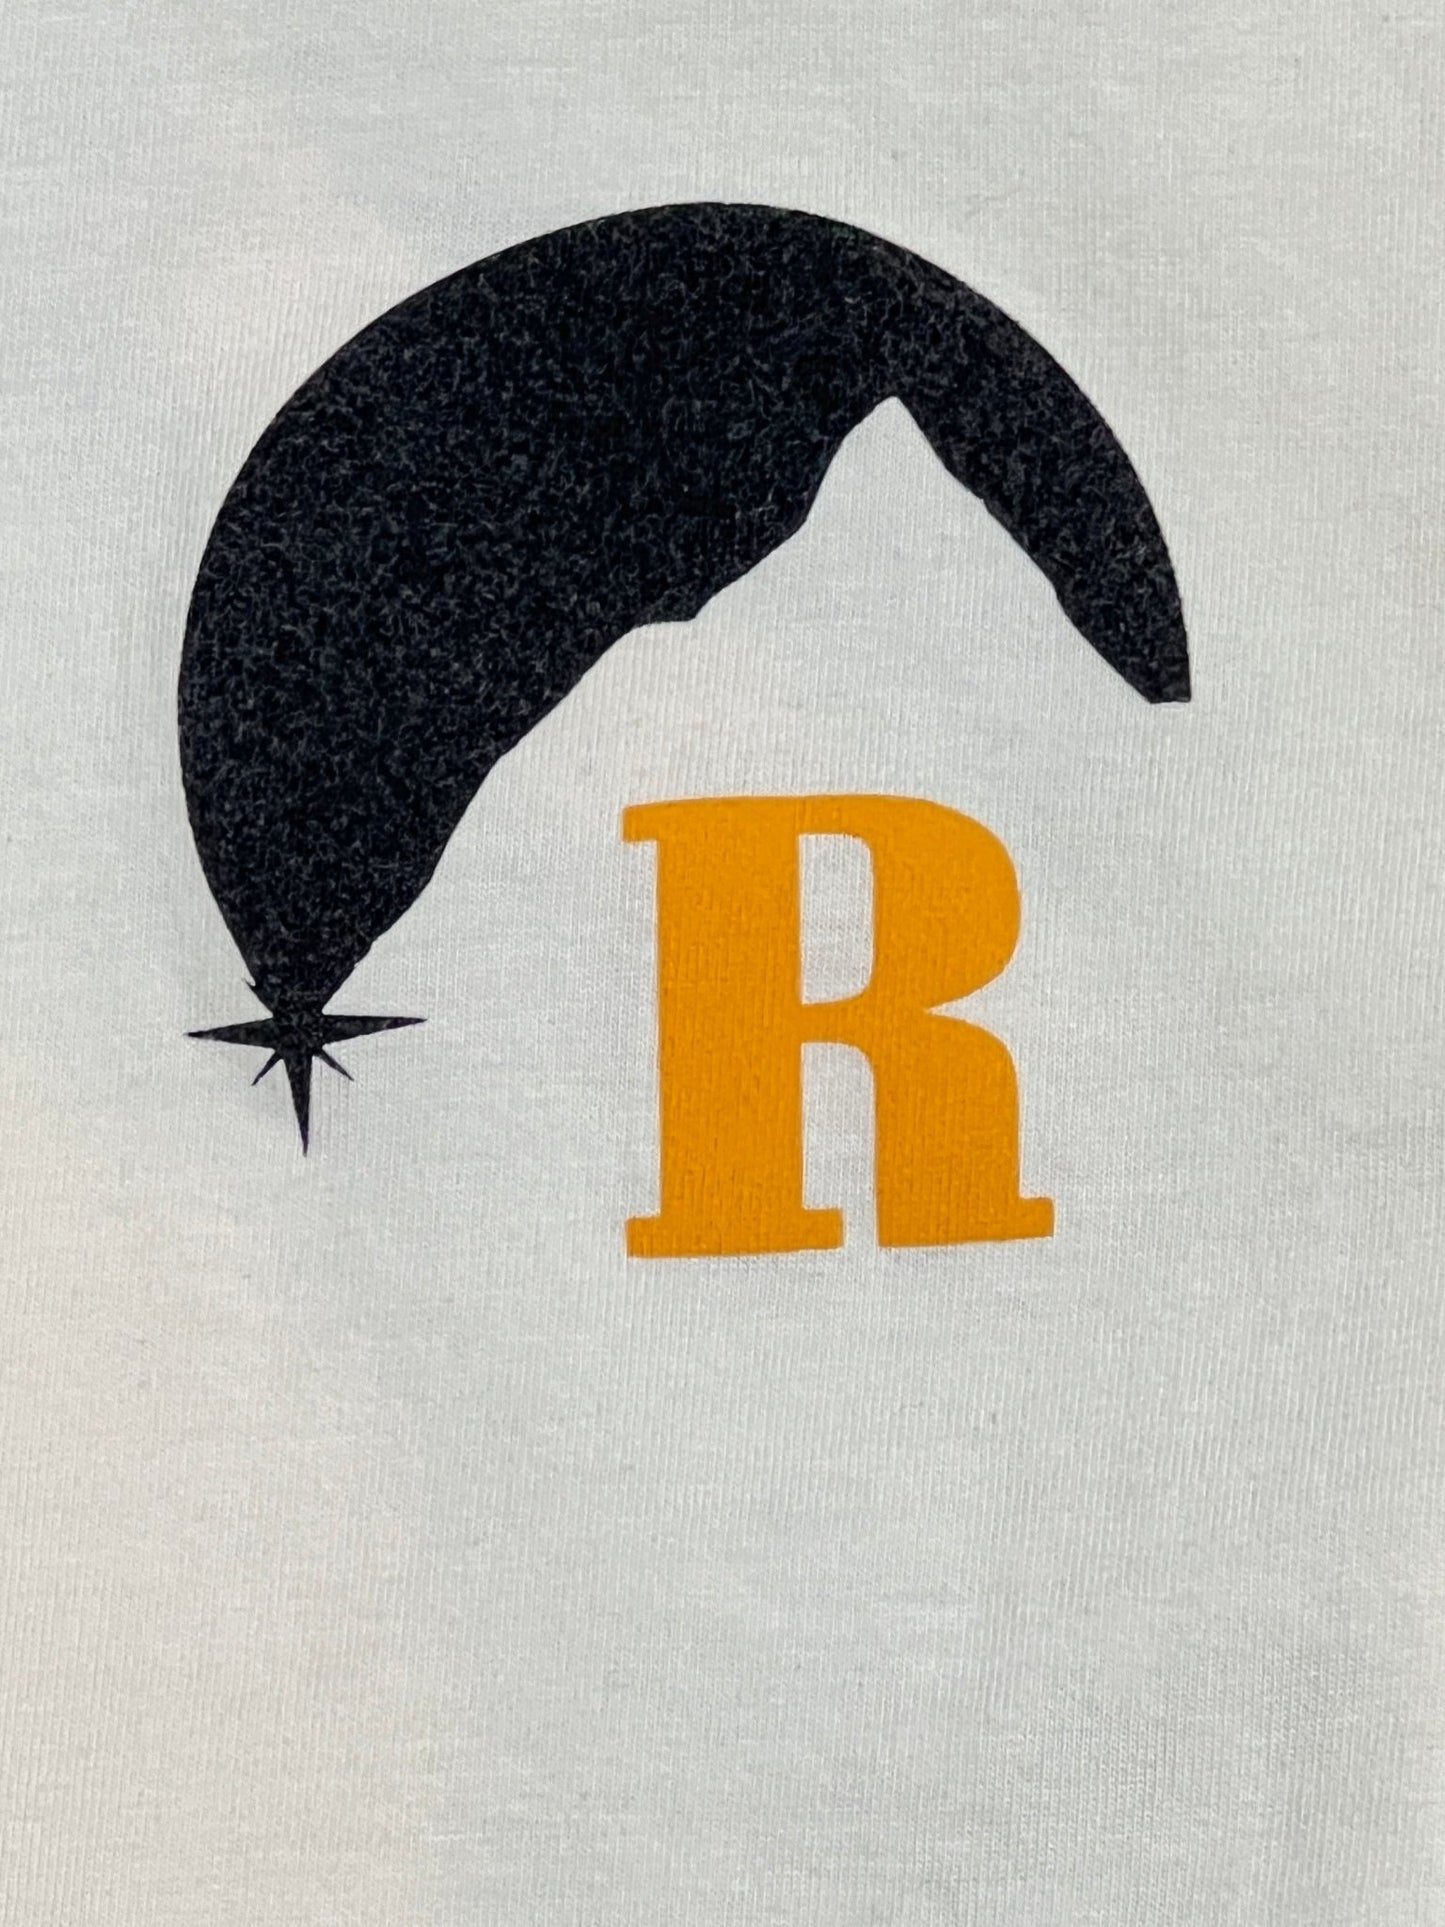 A RHUDE white cotton t-shirt with the letter r on it.